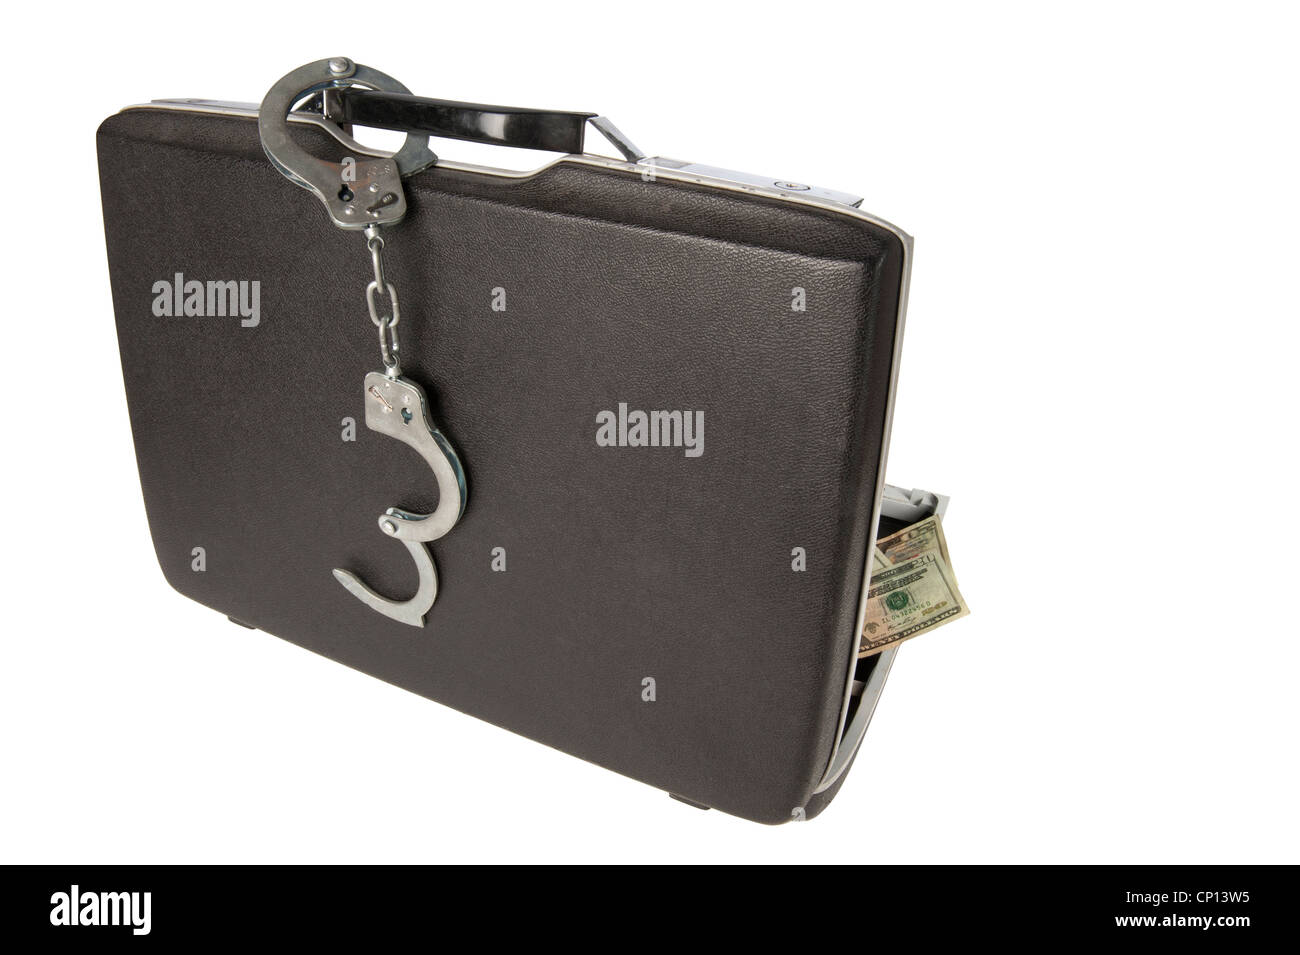 Hard-shell briefcase with stack of $20 U.S. bills visisble, handcuffs on the handle, isolated on a white background Stock Photo